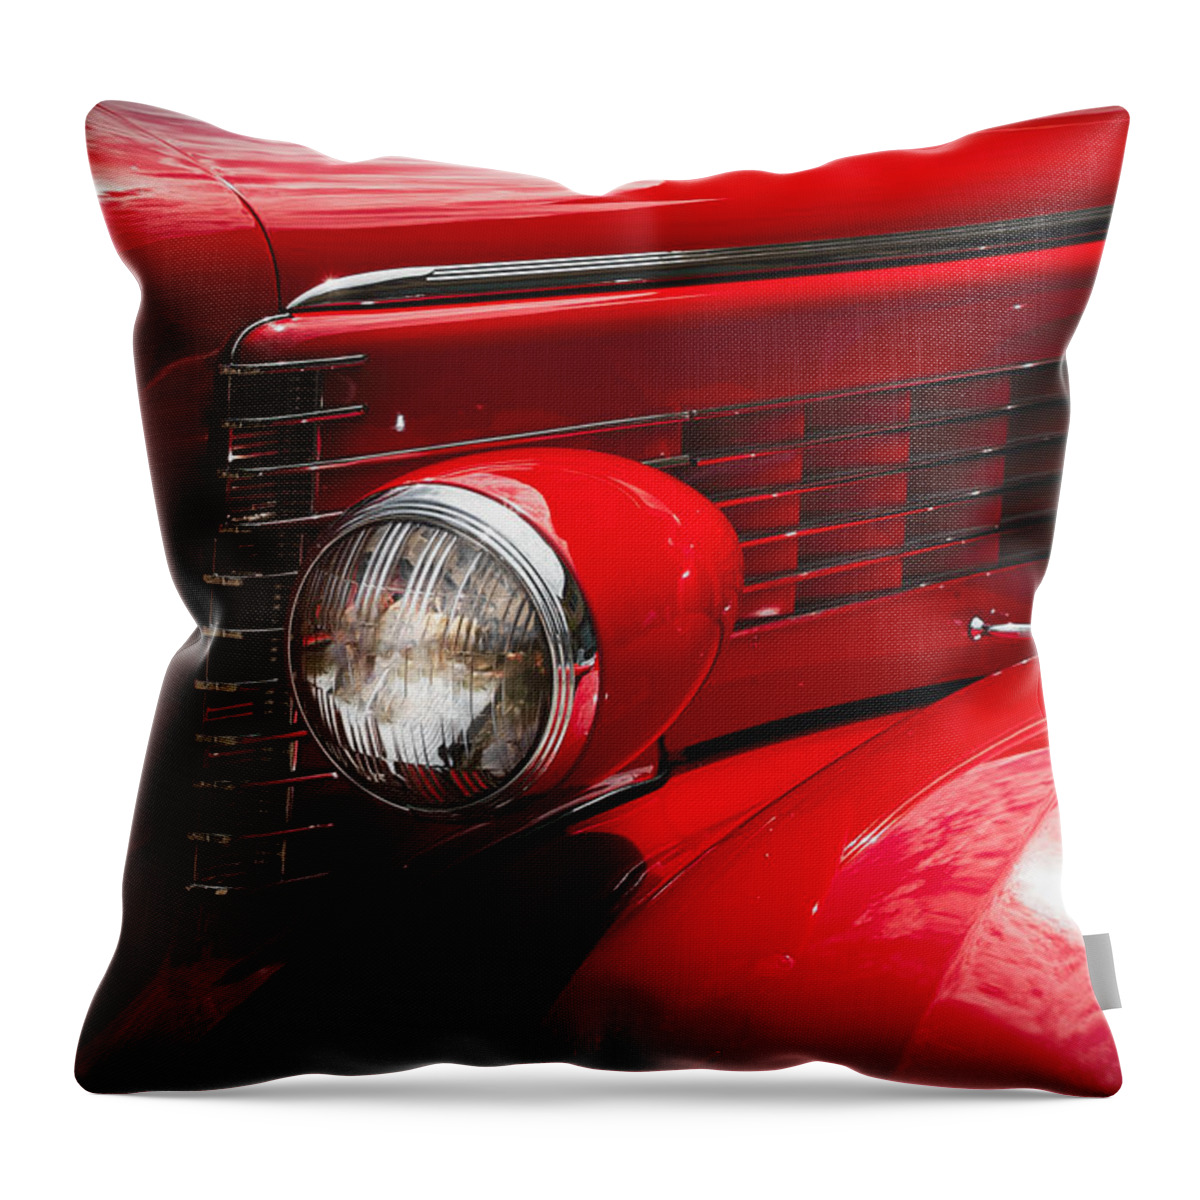 Classic Car Throw Pillow featuring the photograph Red Lasalle by Carrie Hannigan